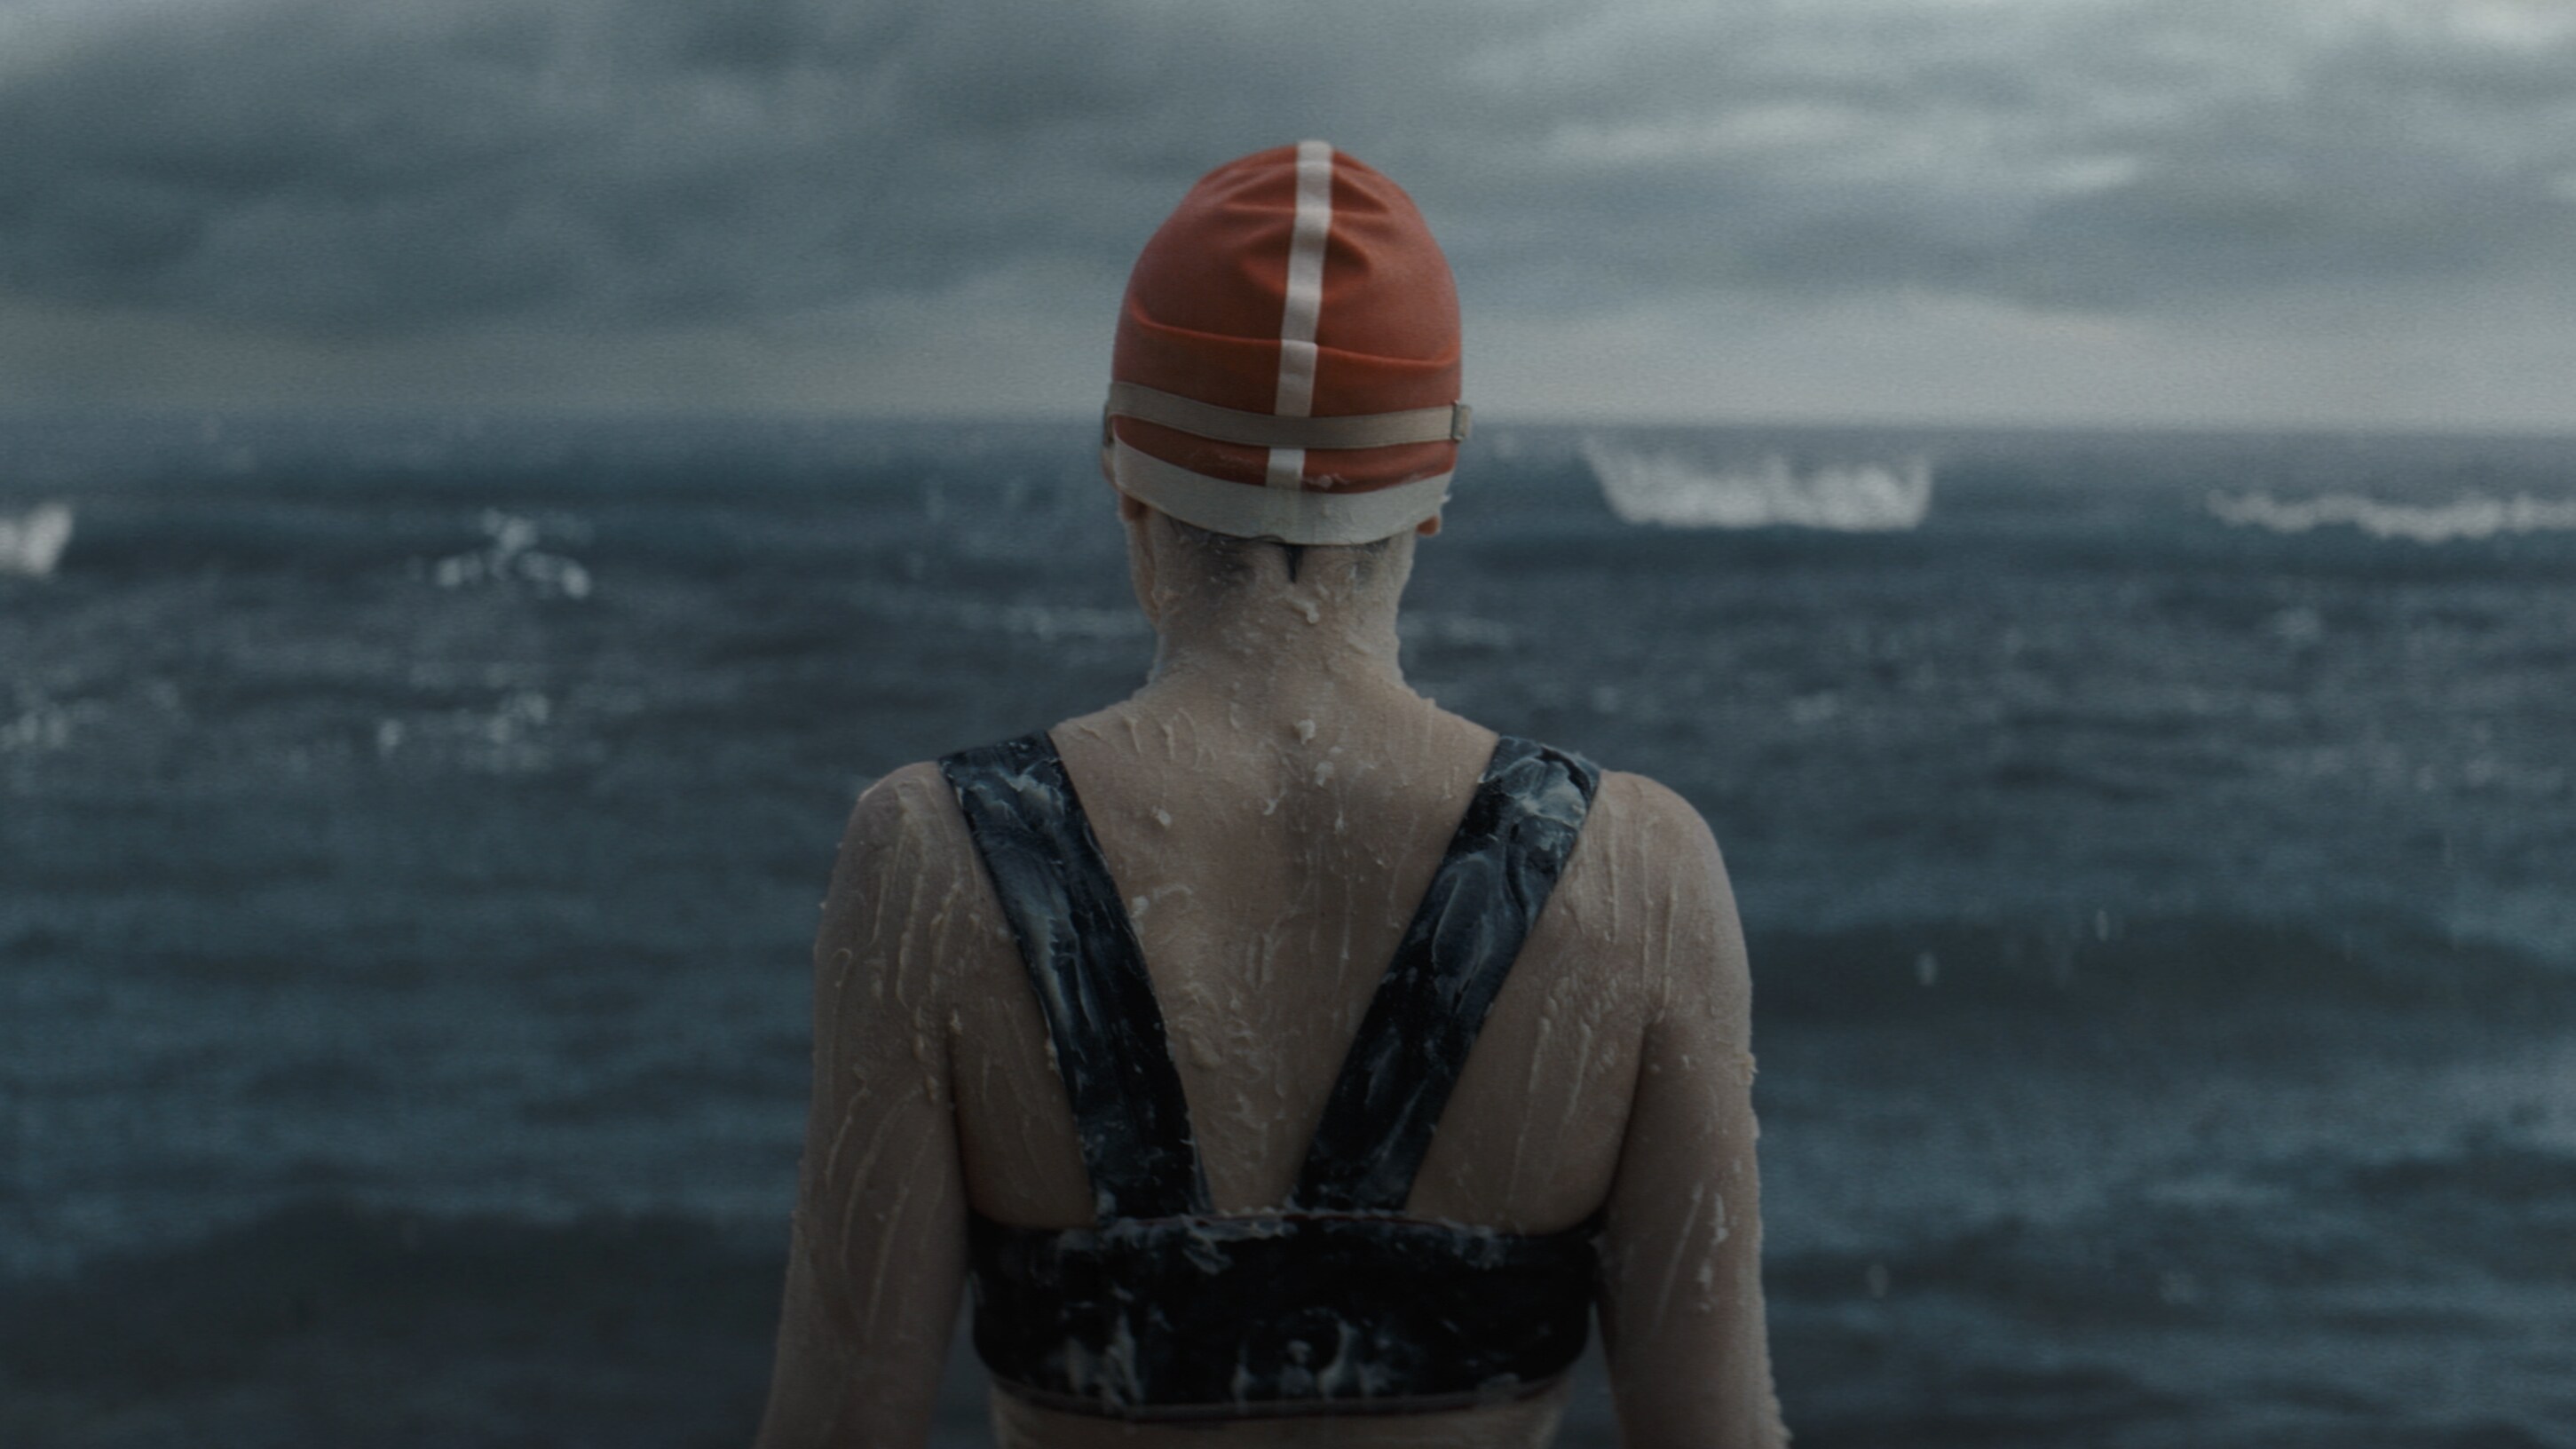 TRAILER FOR DISNEY’S YOUNG WOMAN AND THE SEA, THE EXTRAORDINARY TRUE STORY OF THE FIRST WOMAN TO SUCCESSFULLY  SWIM THE ENGLISH CHANNEL, AVAILABLE NOW